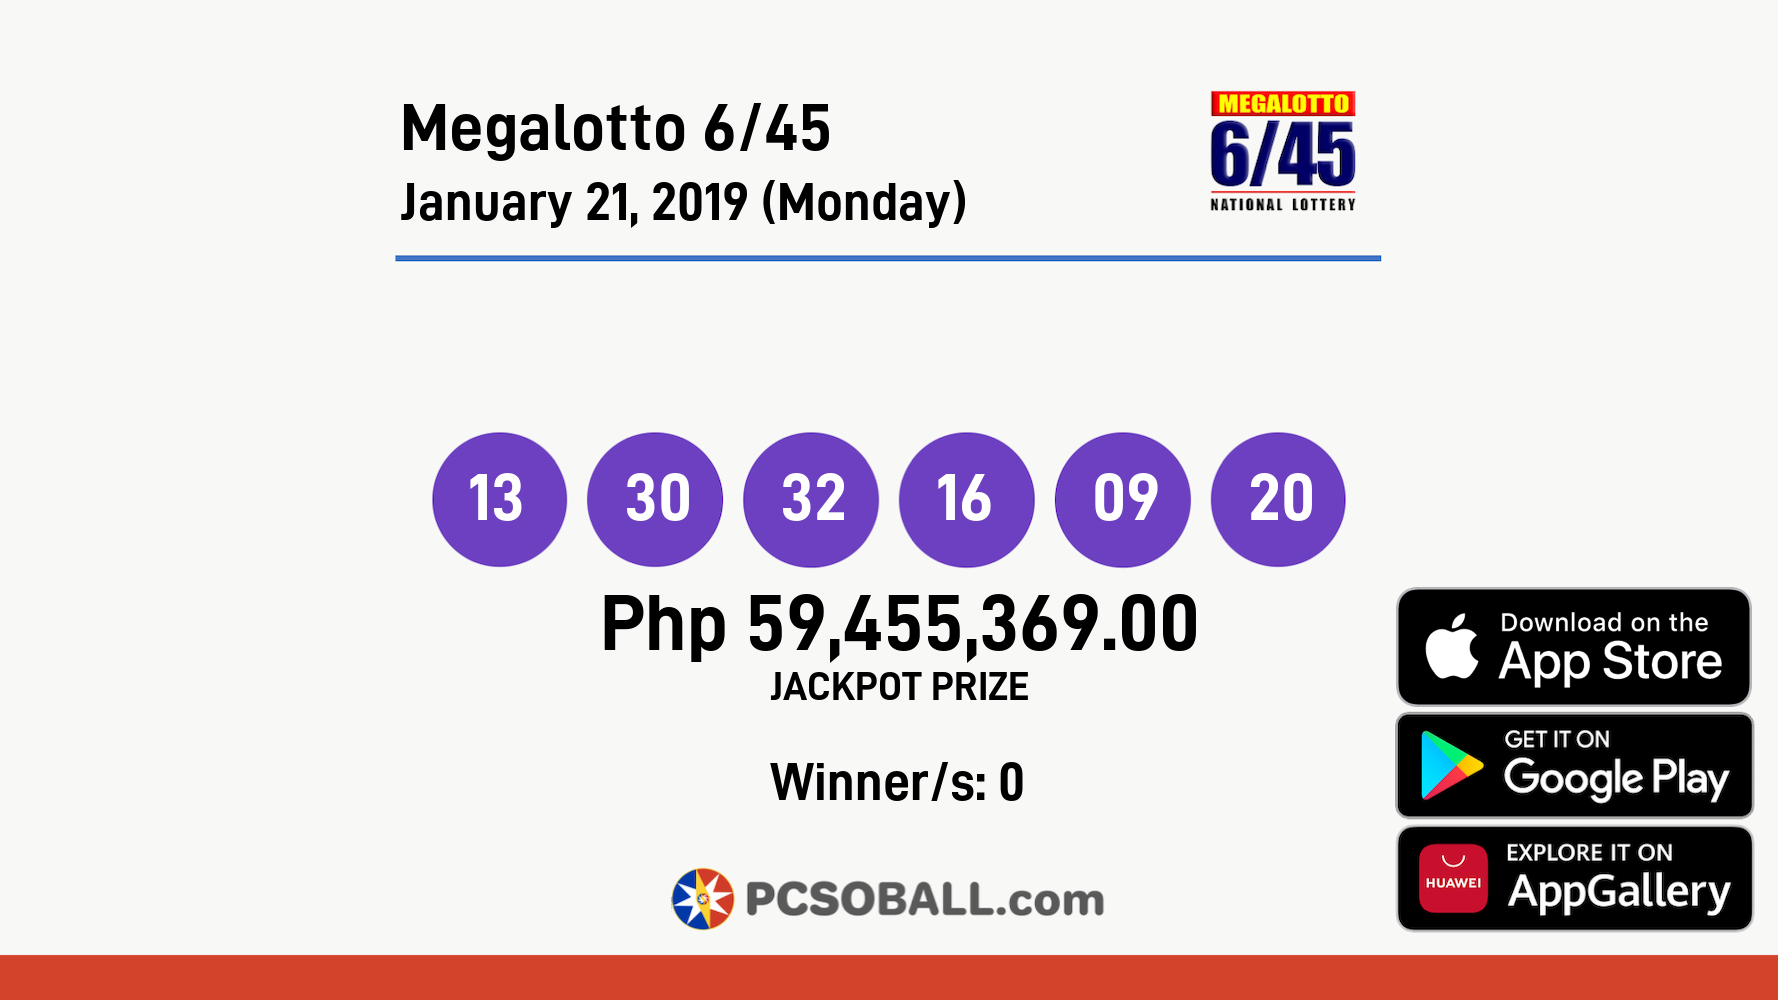 Megalotto 6/45 January 21, 2019 (Monday) Result